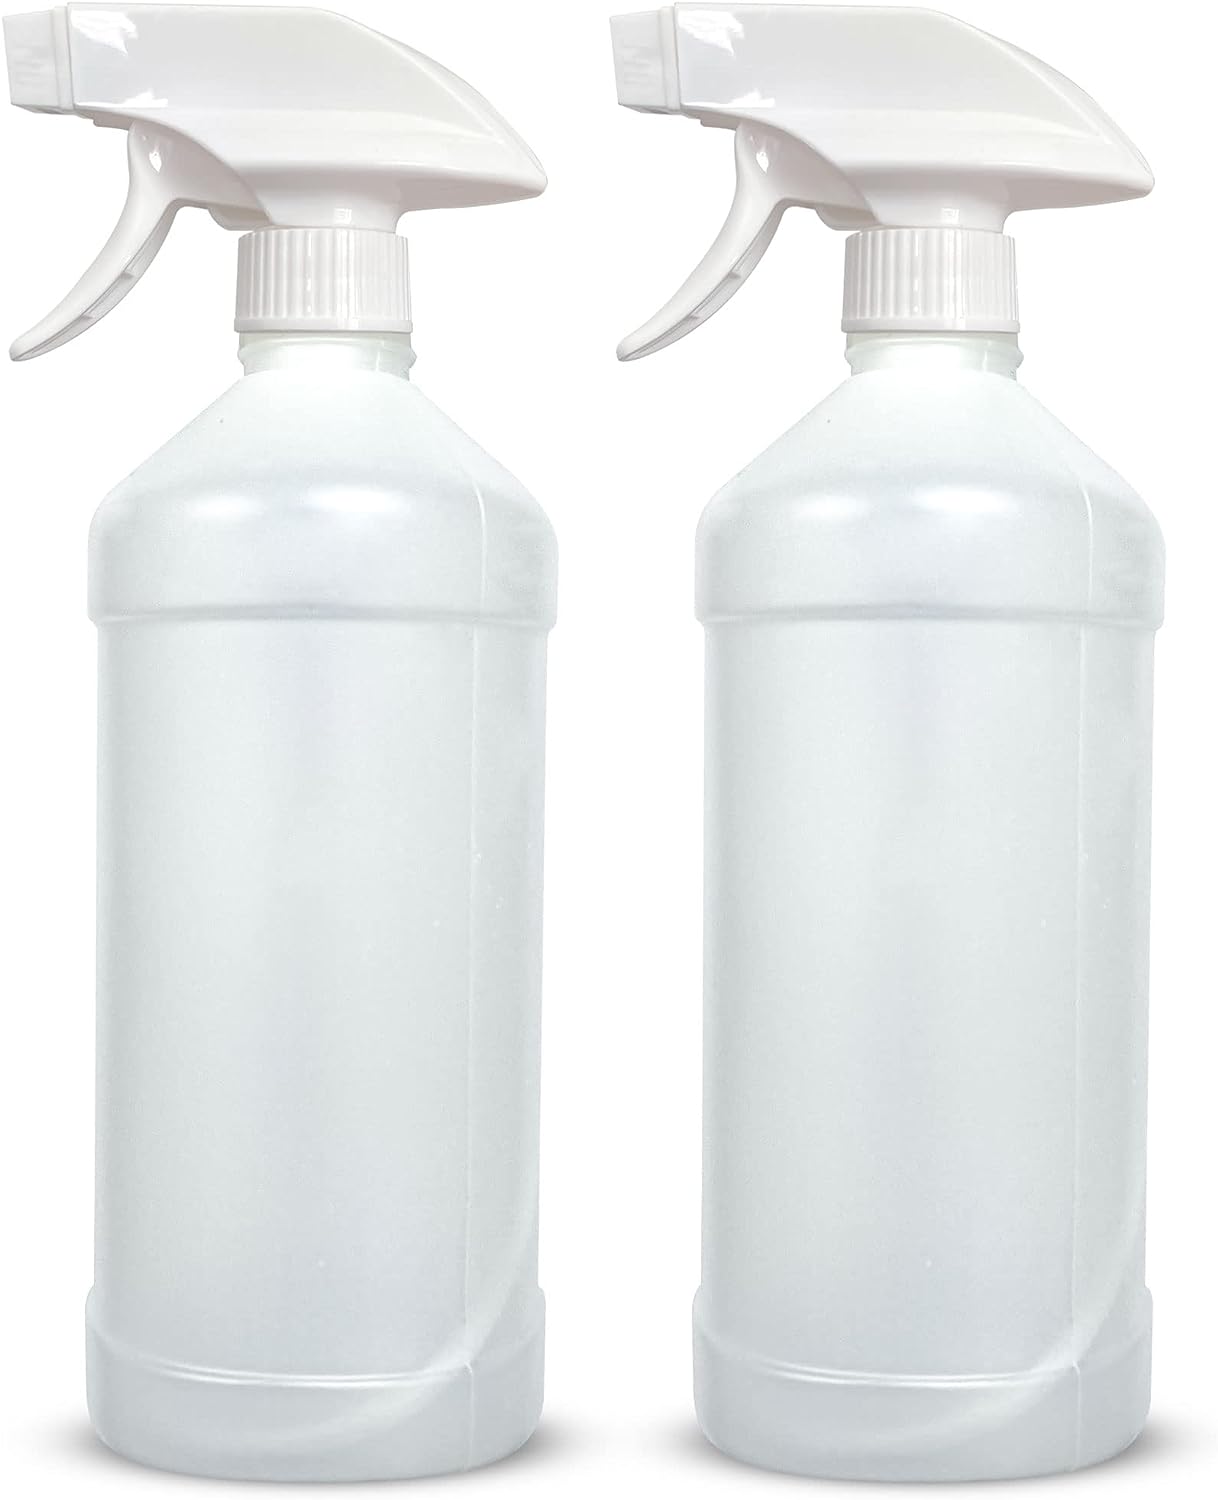 SPRAYZ Large 16oz Spray Bottles For Cleaning and [...]